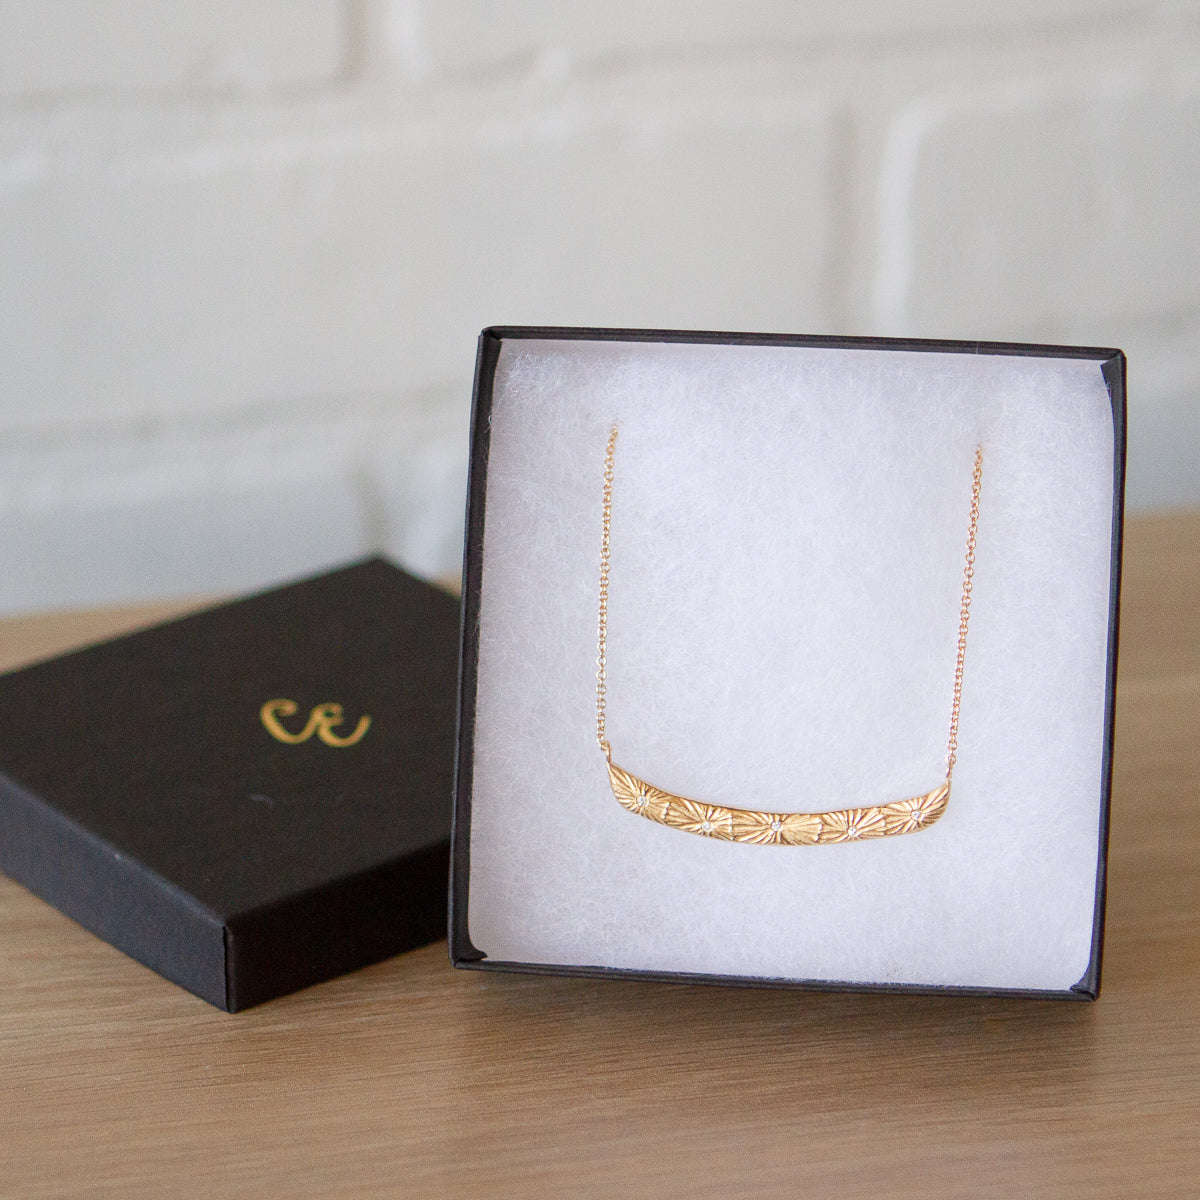 Curved bar necklace with five scattered diamonds and carved sunburst motif in a gift box by Corey Egan